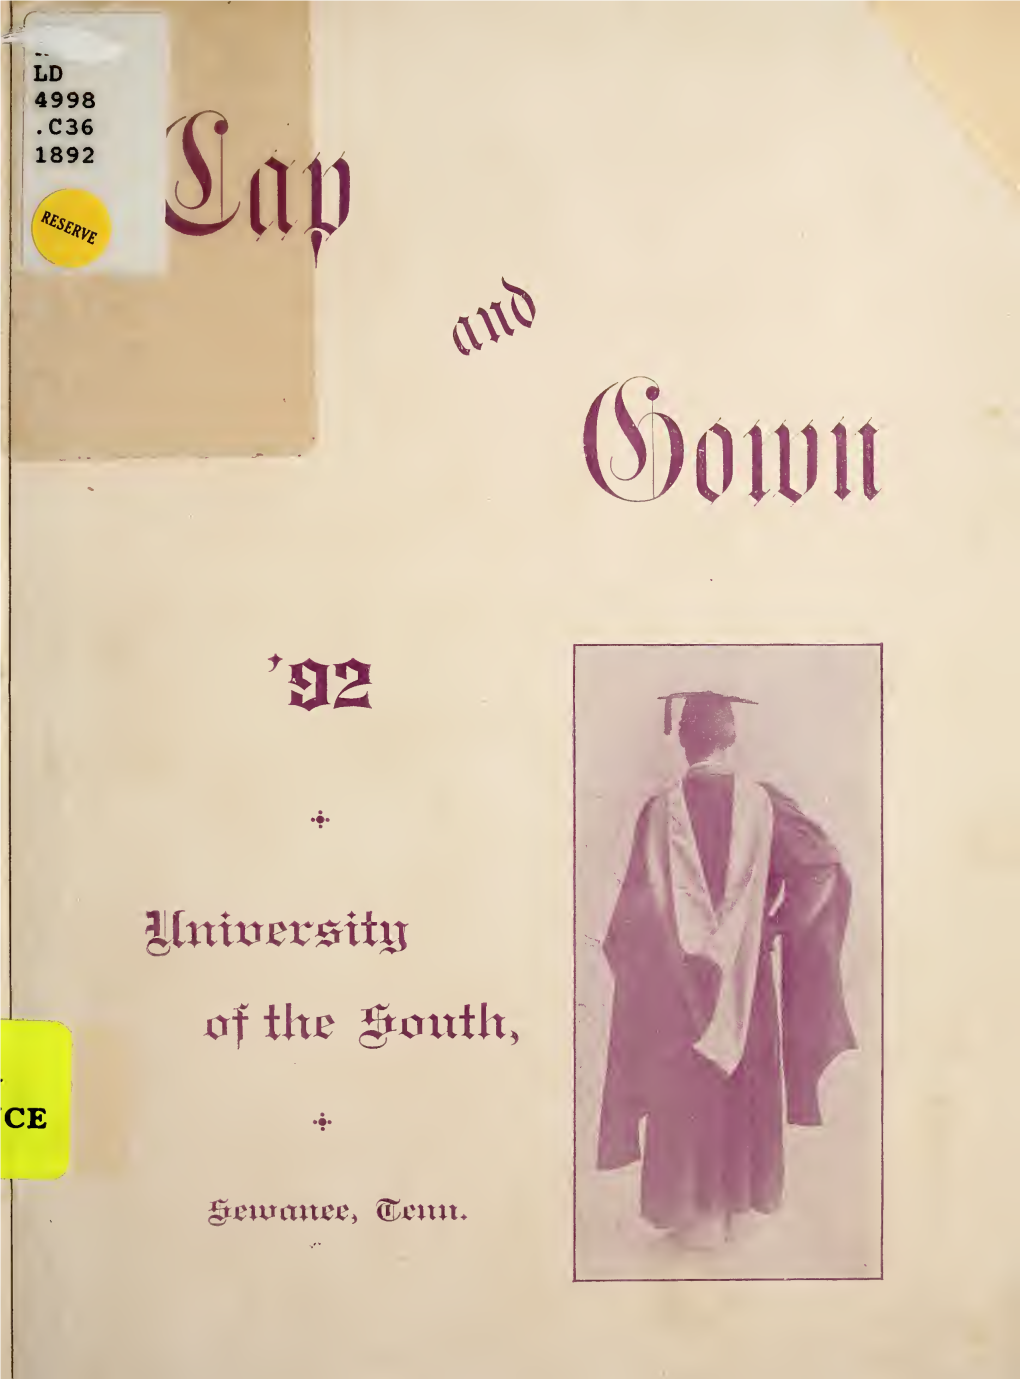 Cap and Gown, 1892